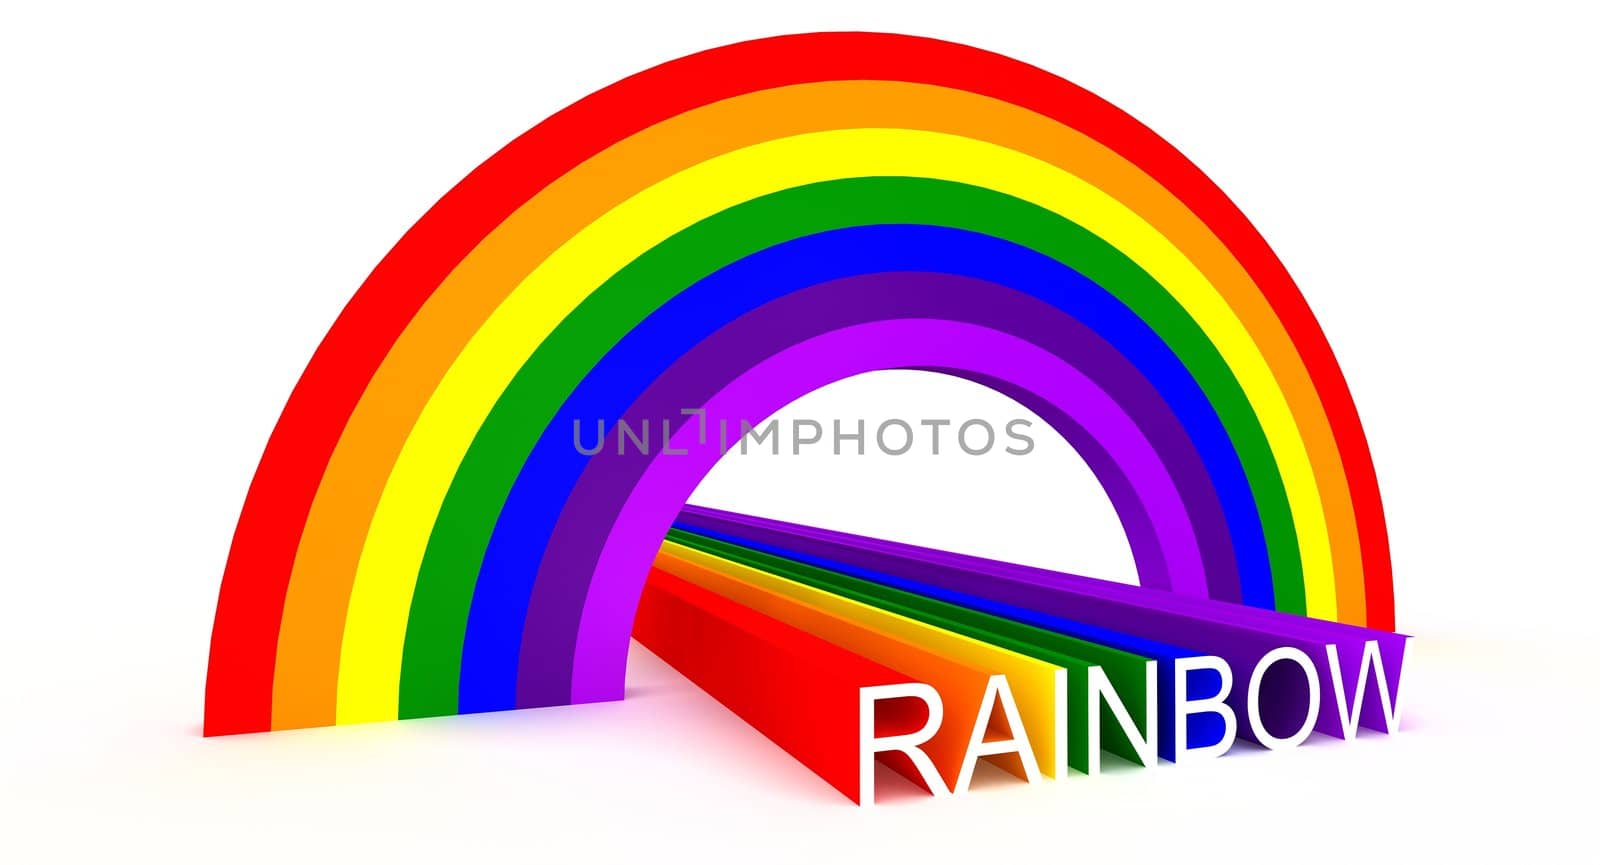 Rainbow colors and spelling by jareso